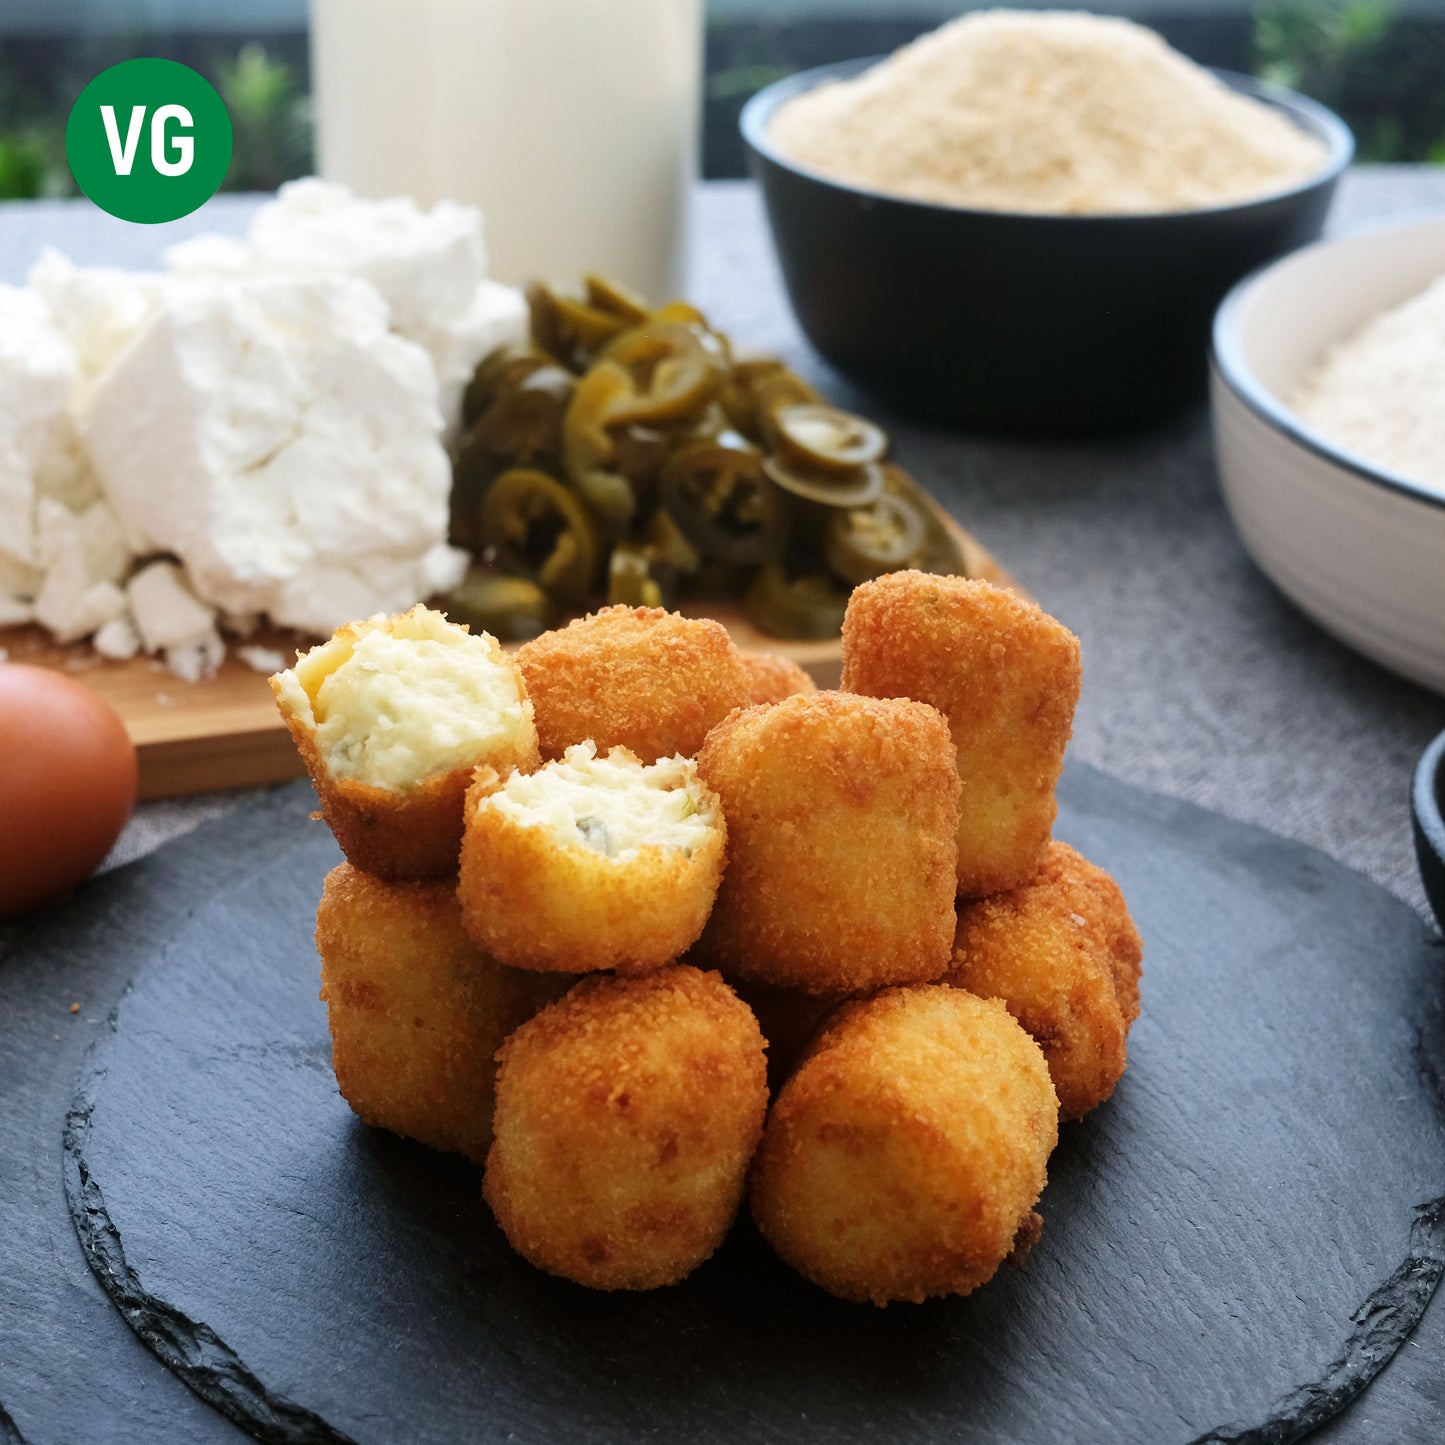 Goat cheese and jalapeno croquetas with egg, breadcrumbs, flour, milk.